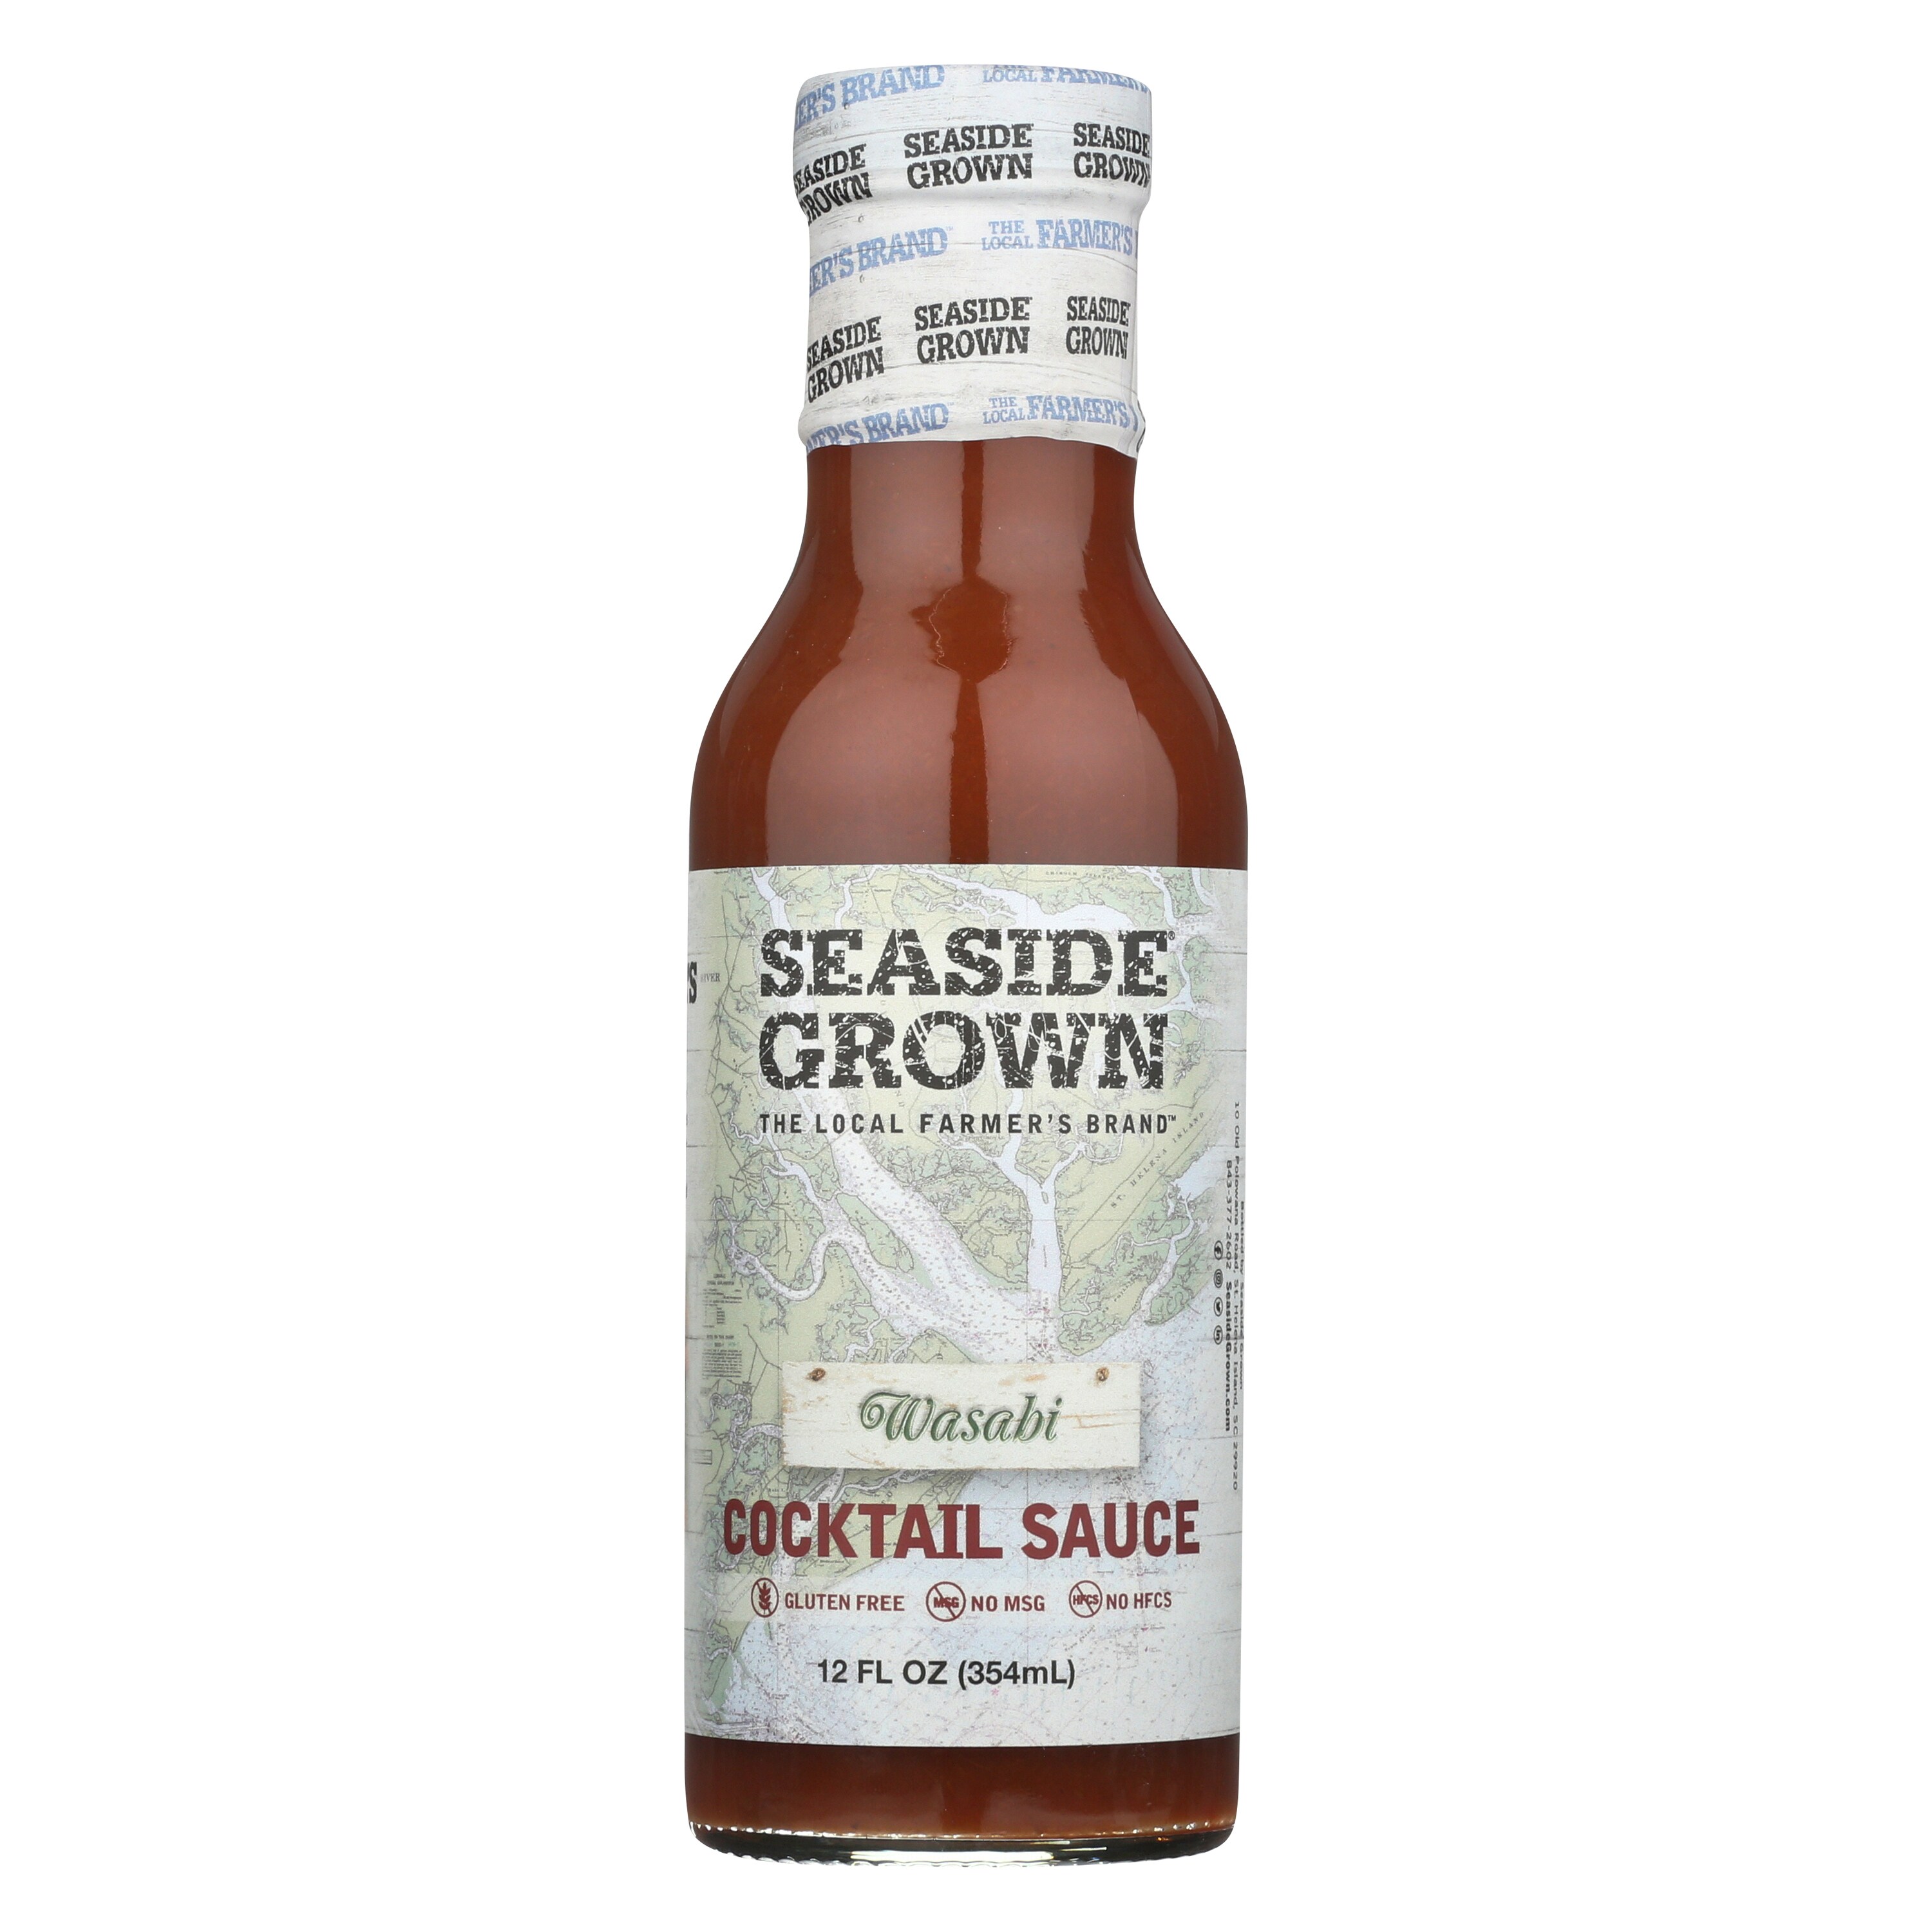 Seaside Grown Wasabi Cocktail Sauce 12oz - Original Flavor, Gluten-Free, No MSG, No High Fructose Corn Syrup - Topping for Dry Seasoning & Marinades -  856141008241